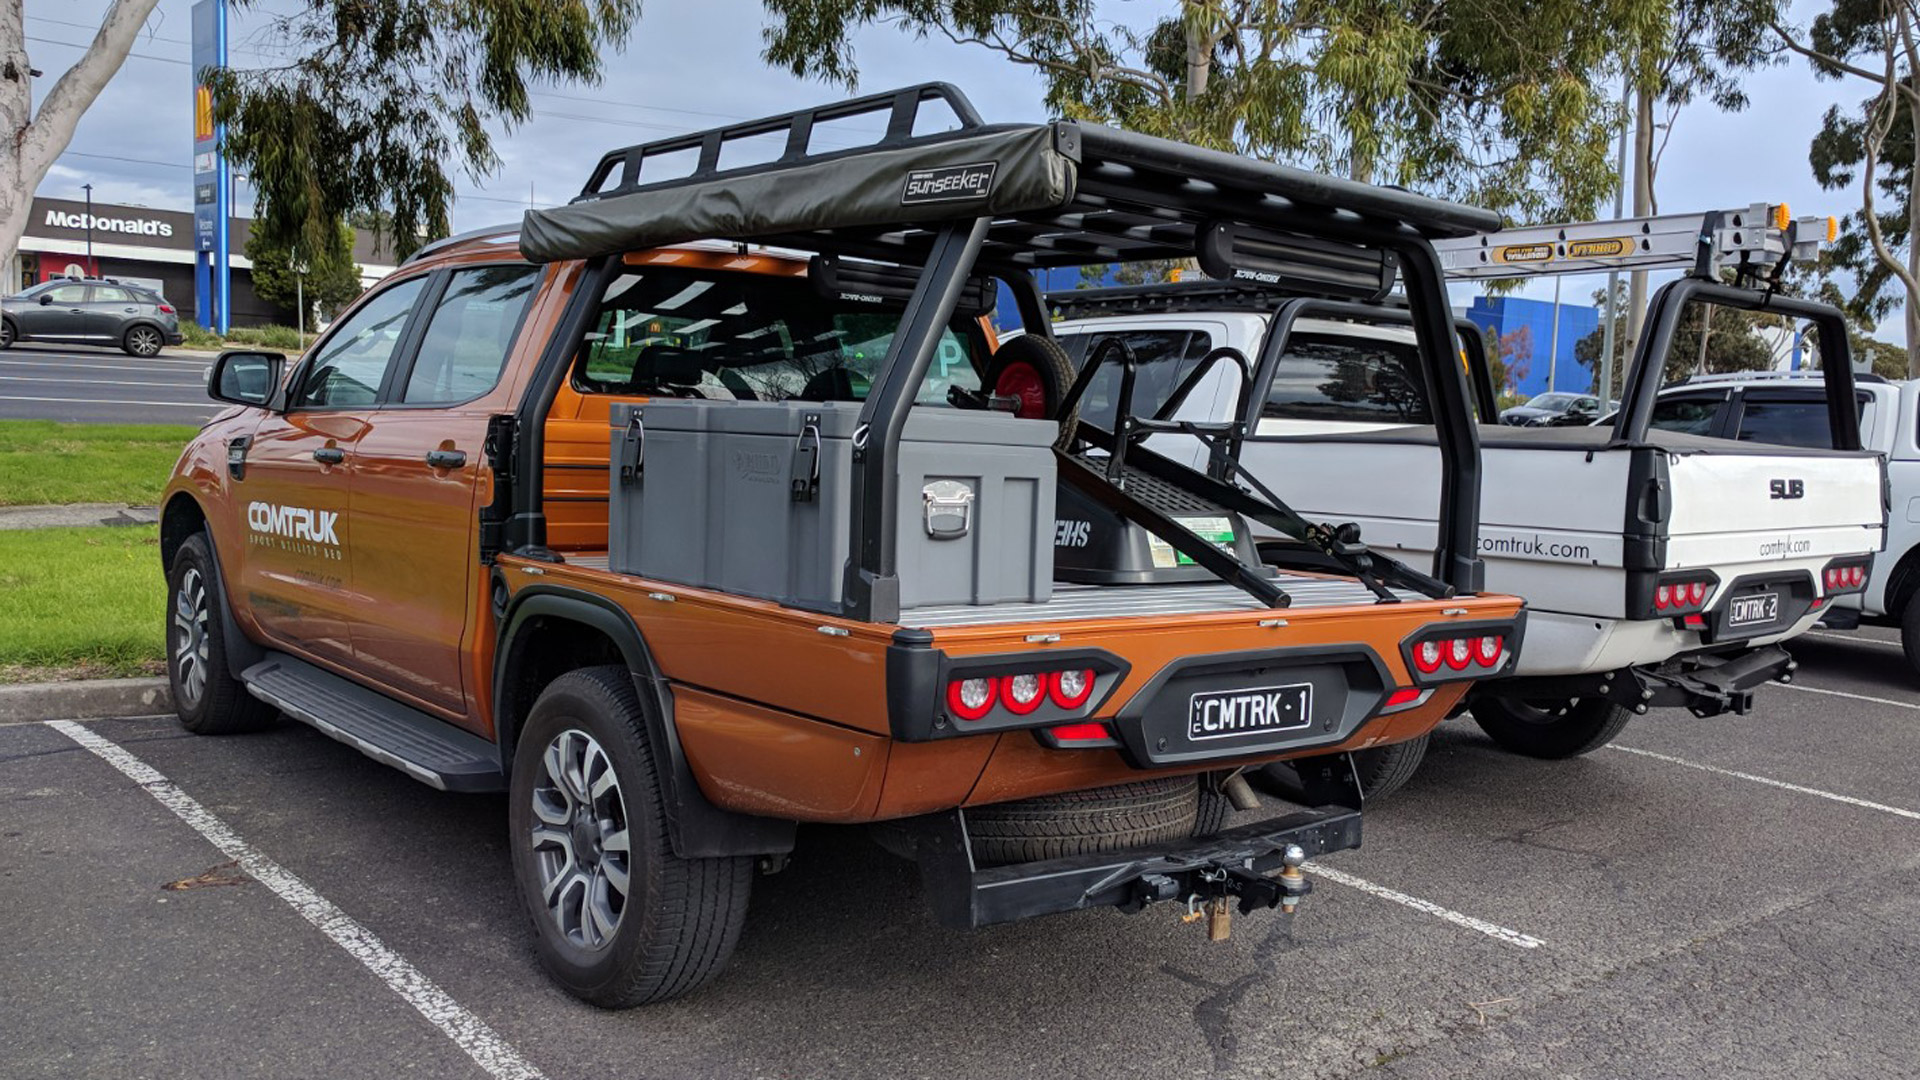 Ford Ranger SUB and Toyota HiLux SUB at Bunnings